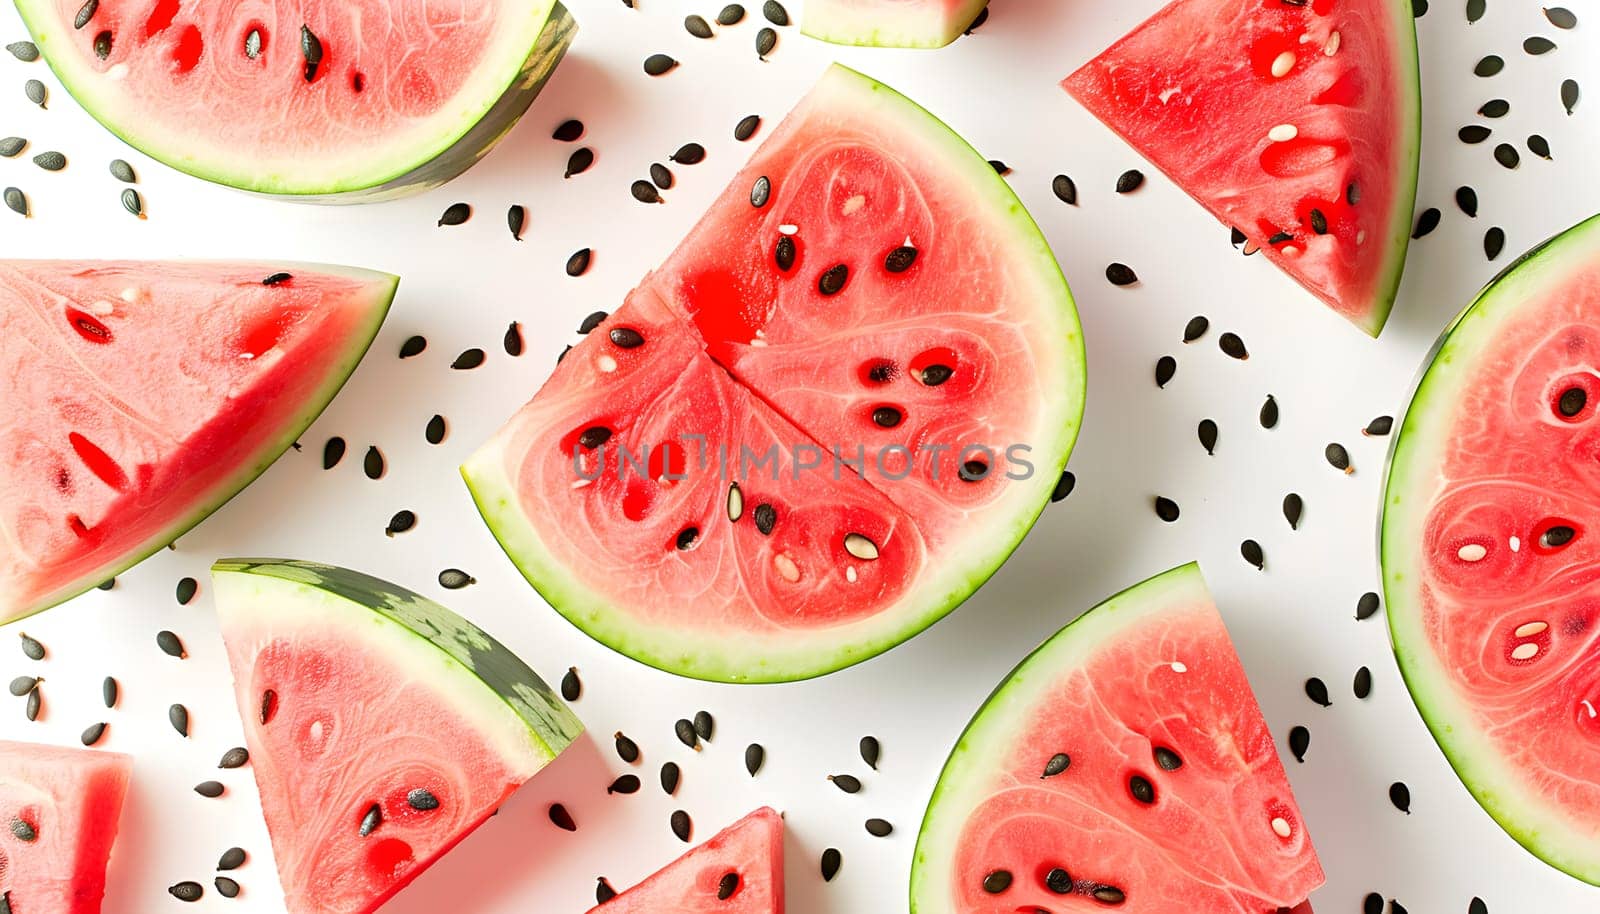 A photograph capturing slices of watermelon, a refreshing fruit known for its vibrant green rind and juicy red flesh with black seeds, arranged on a white surface